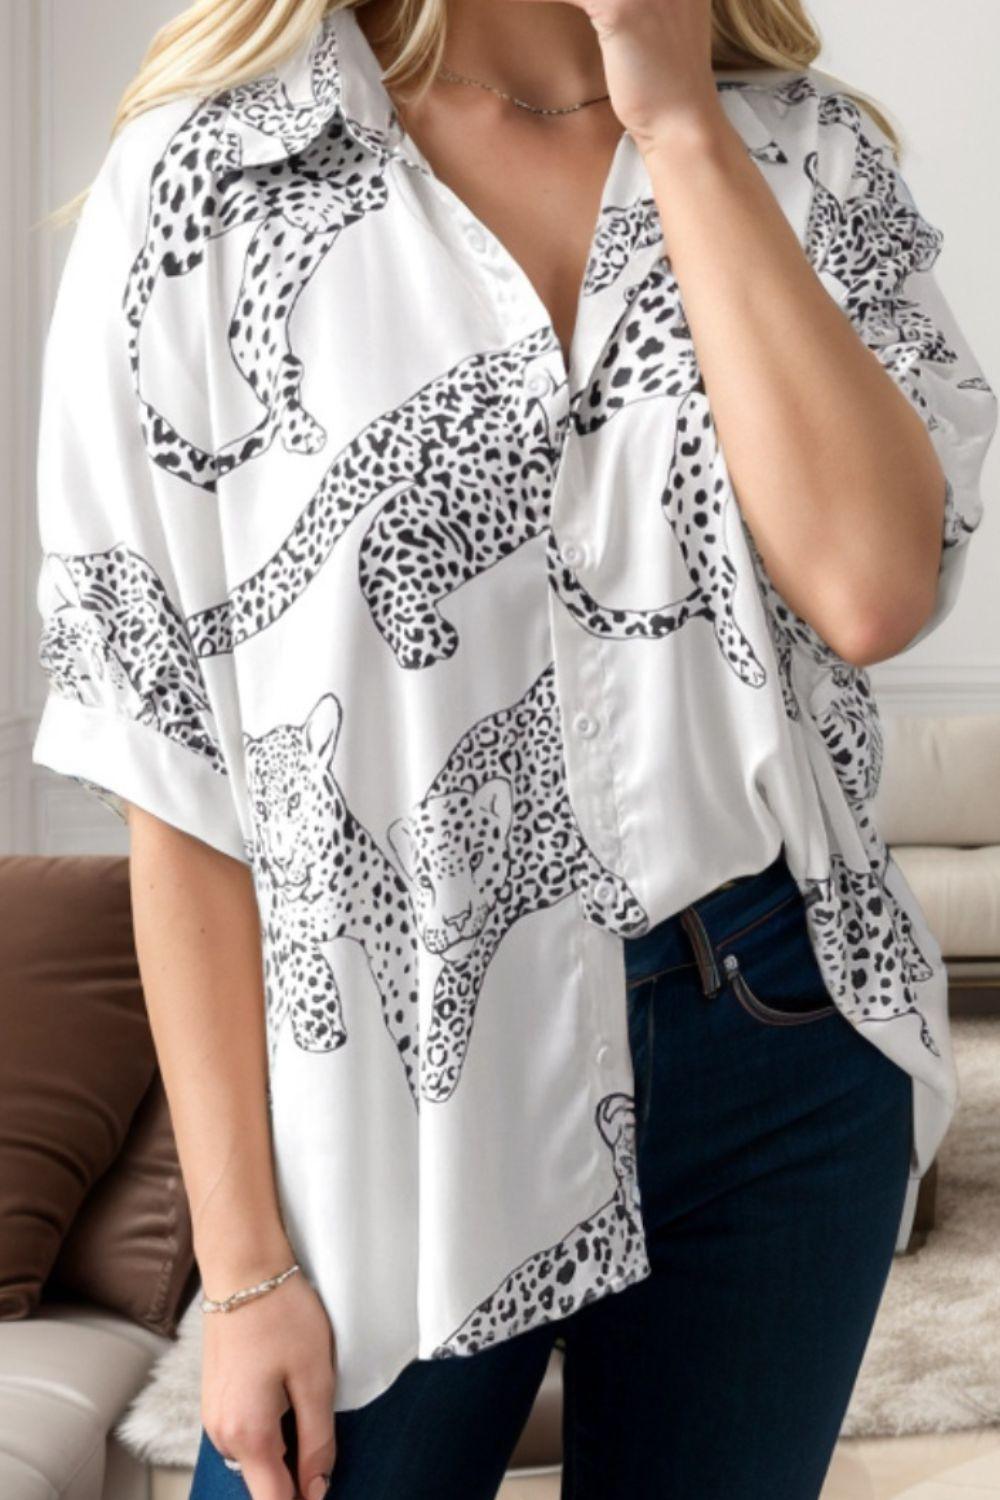 a woman wearing a white shirt with a leopard print on it